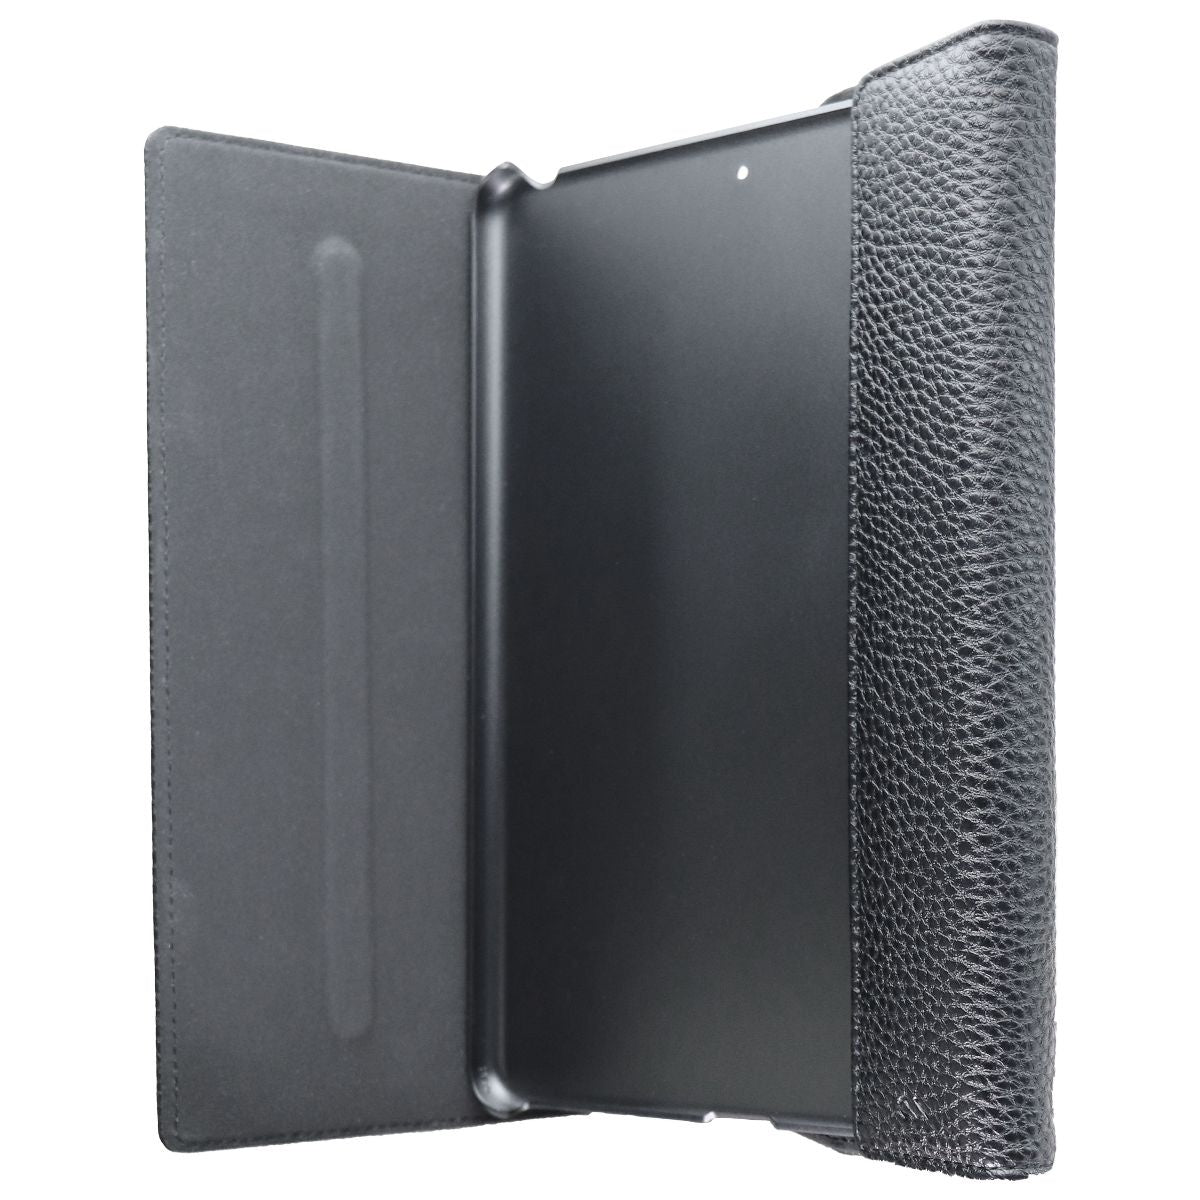 Case-Mate Venture Folio Case for Apple iPad Mini 5th & 4th Gen - Black iPad/Tablet Accessories - Cases, Covers, Keyboard Folios Case-Mate    - Simple Cell Bulk Wholesale Pricing - USA Seller